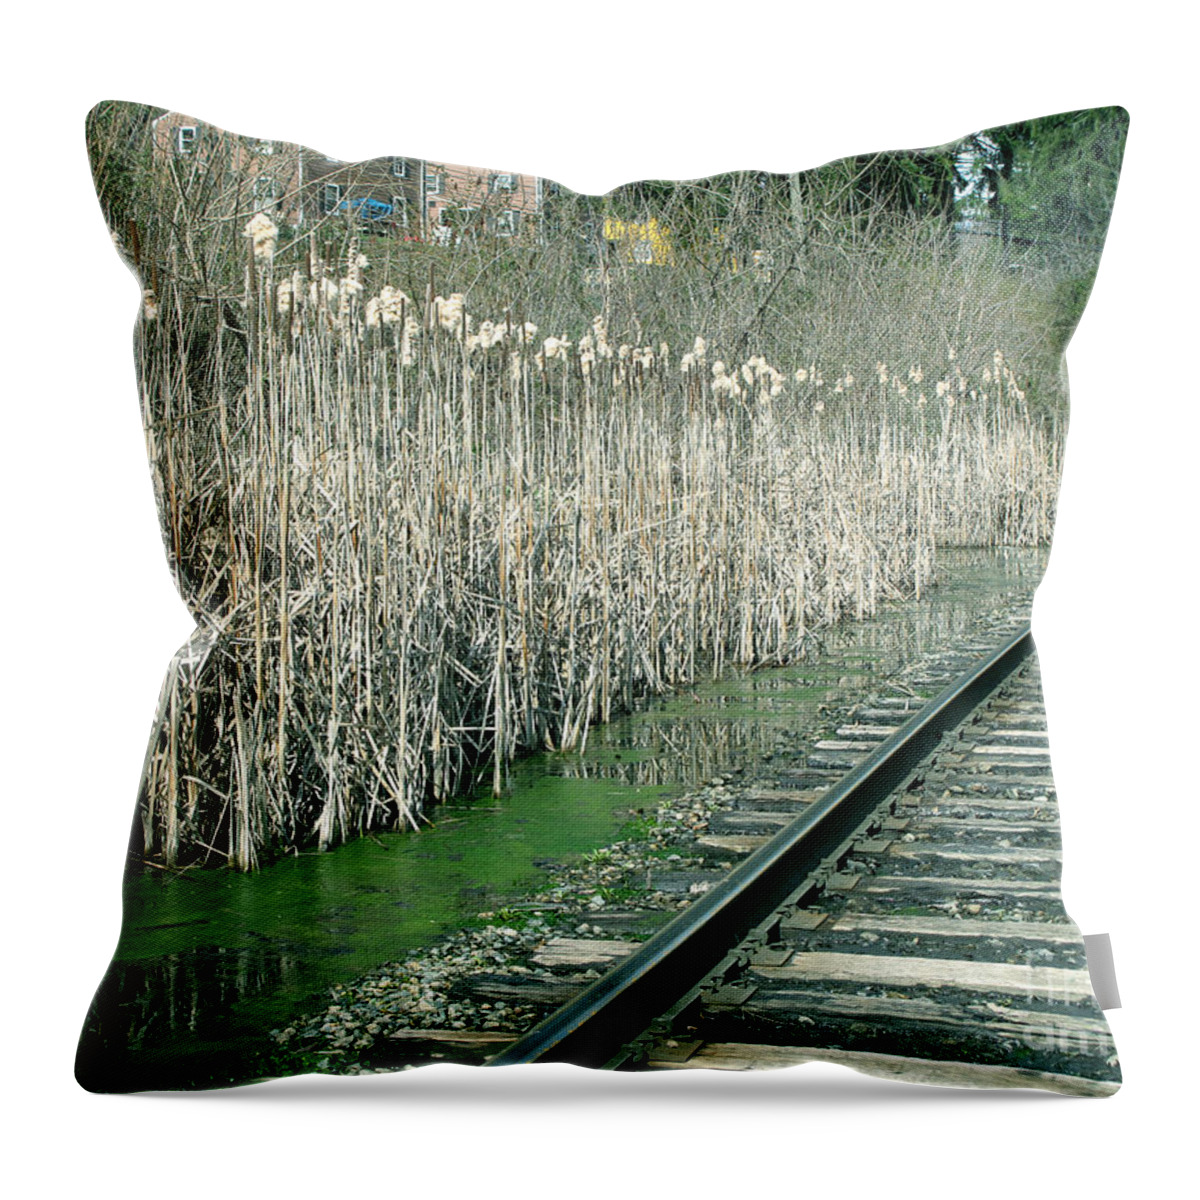 Cattails Throw Pillow featuring the photograph Cattails by the Tracks by Sandy McIntire